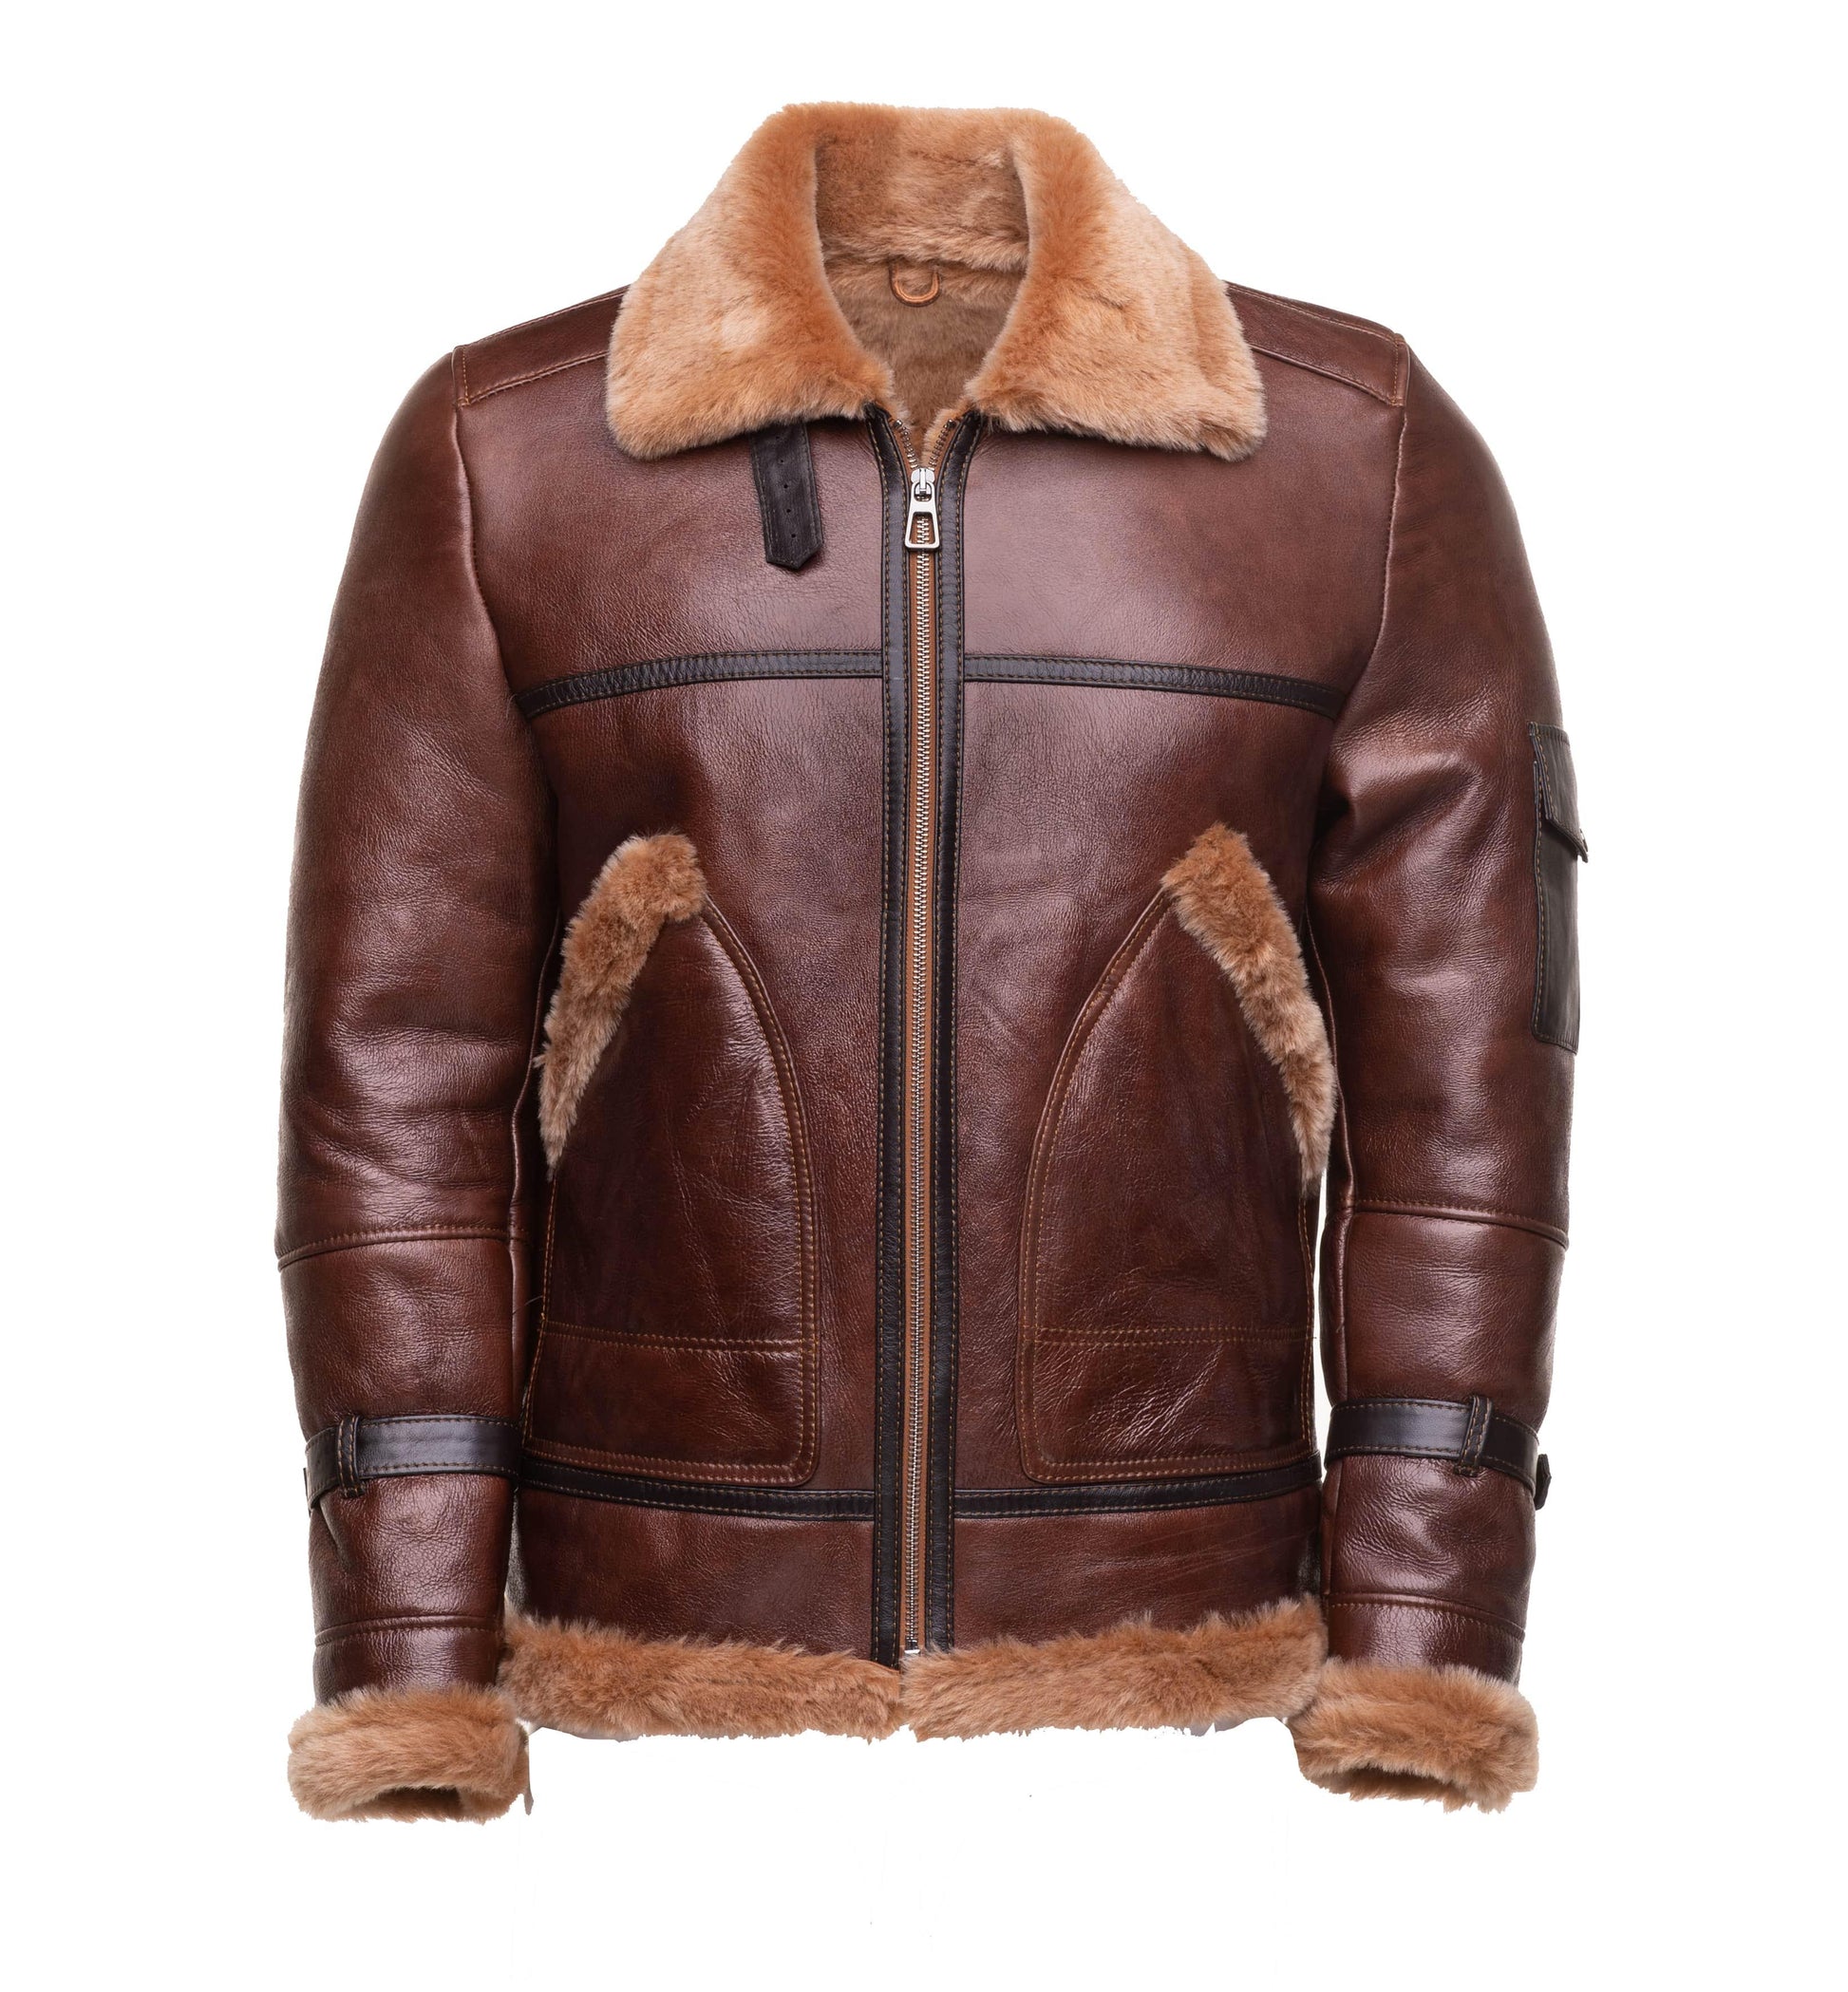 Esa Brown Shearling Sheepskin Bomber Jacket with large pockets - Leather Loom